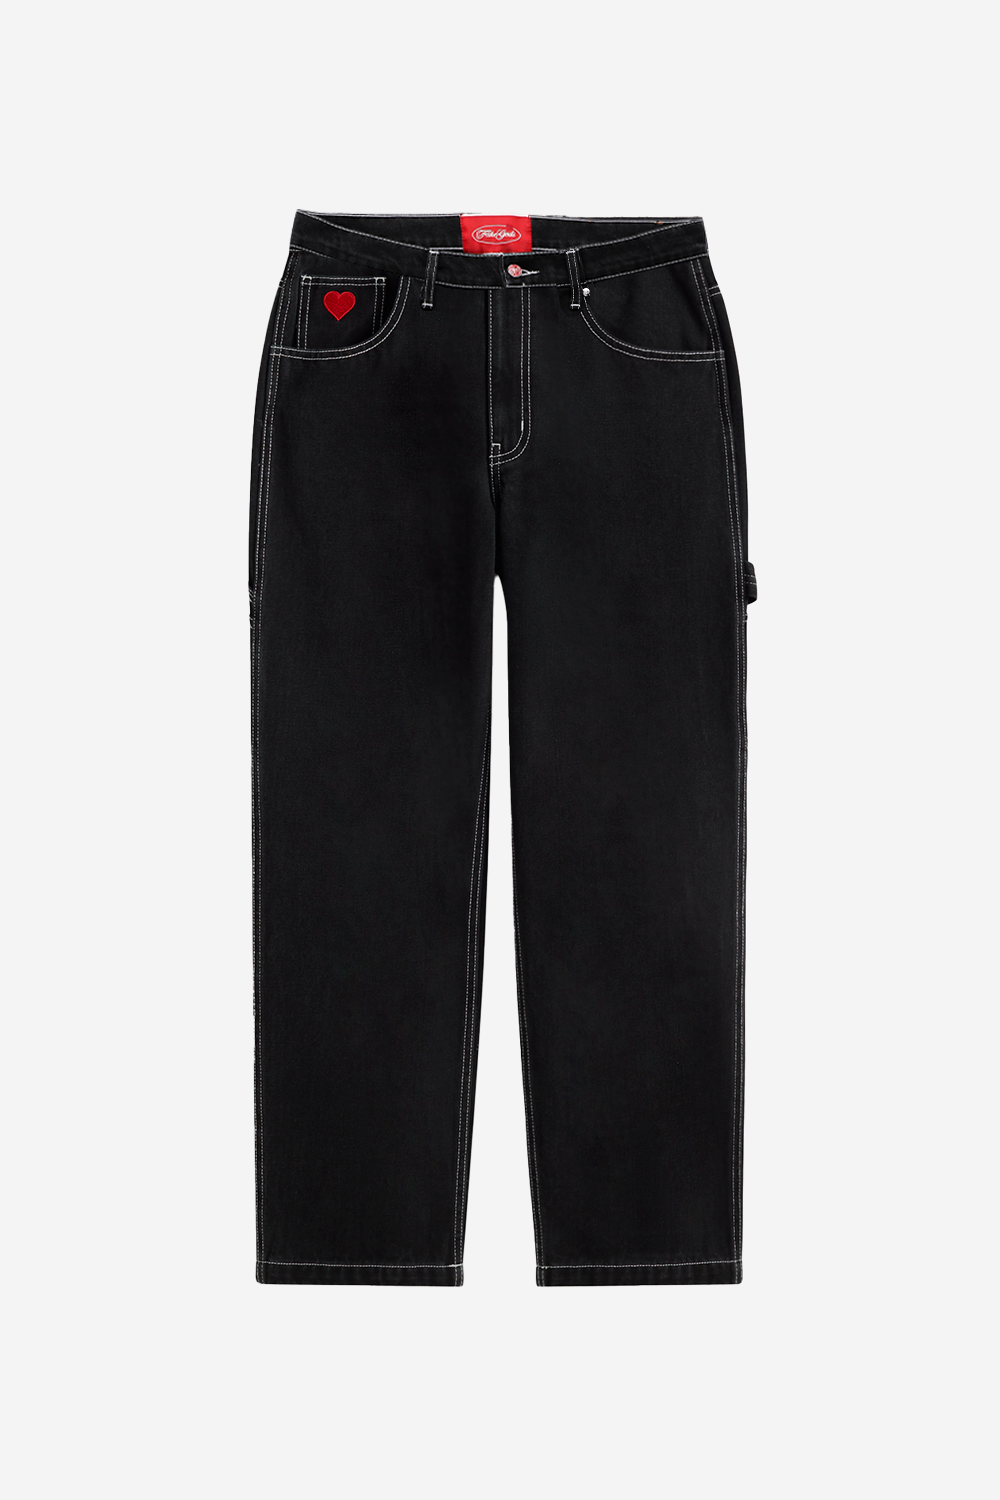 STRAIGHT TO THE HEART JEANS BLACK